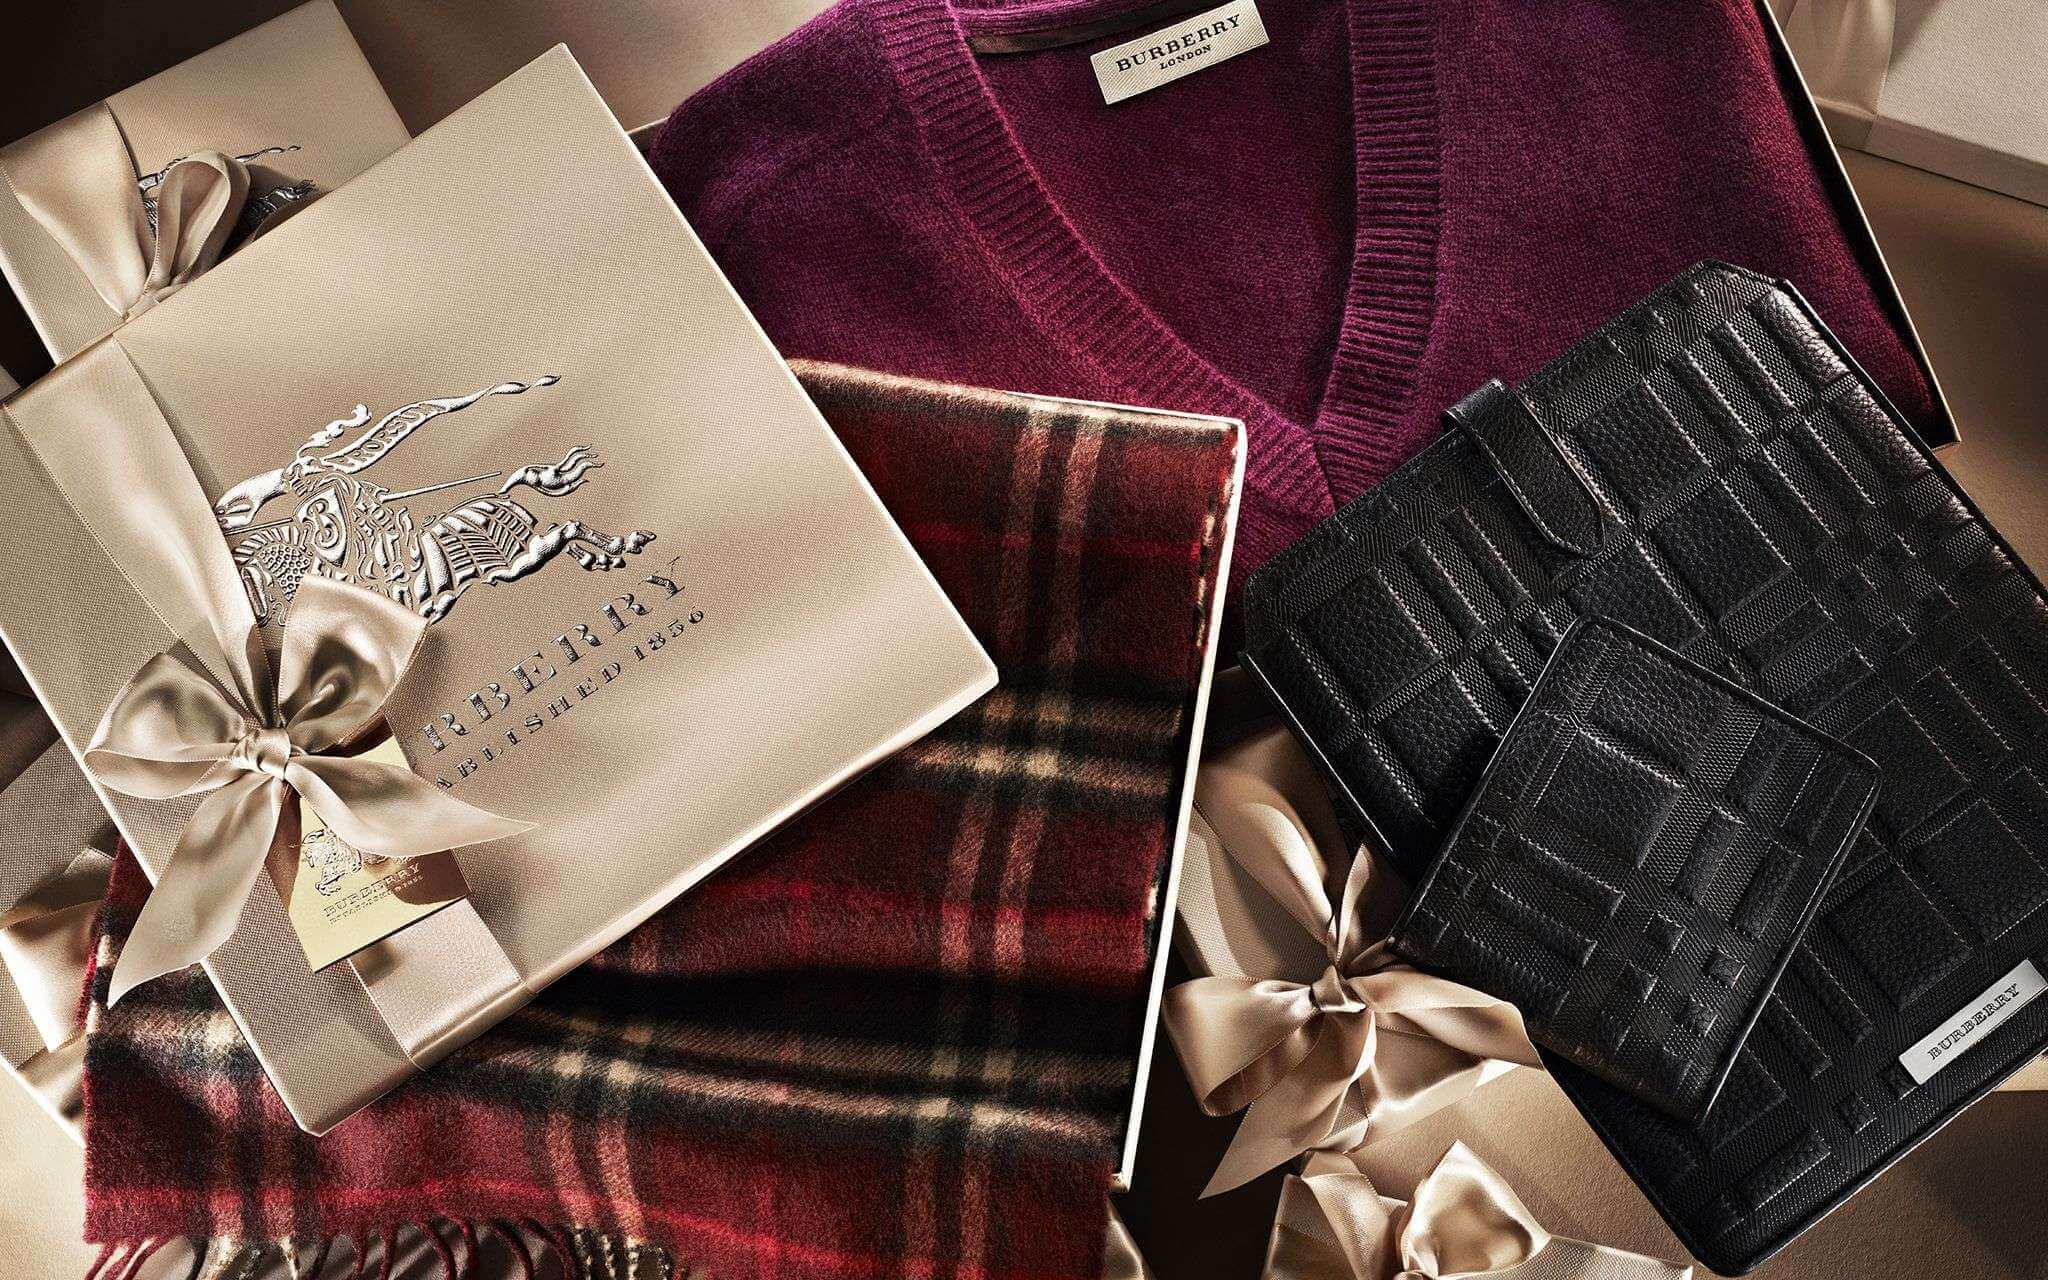 Burberry Menswear Collection That Could Be The Perfect Christmas Gift